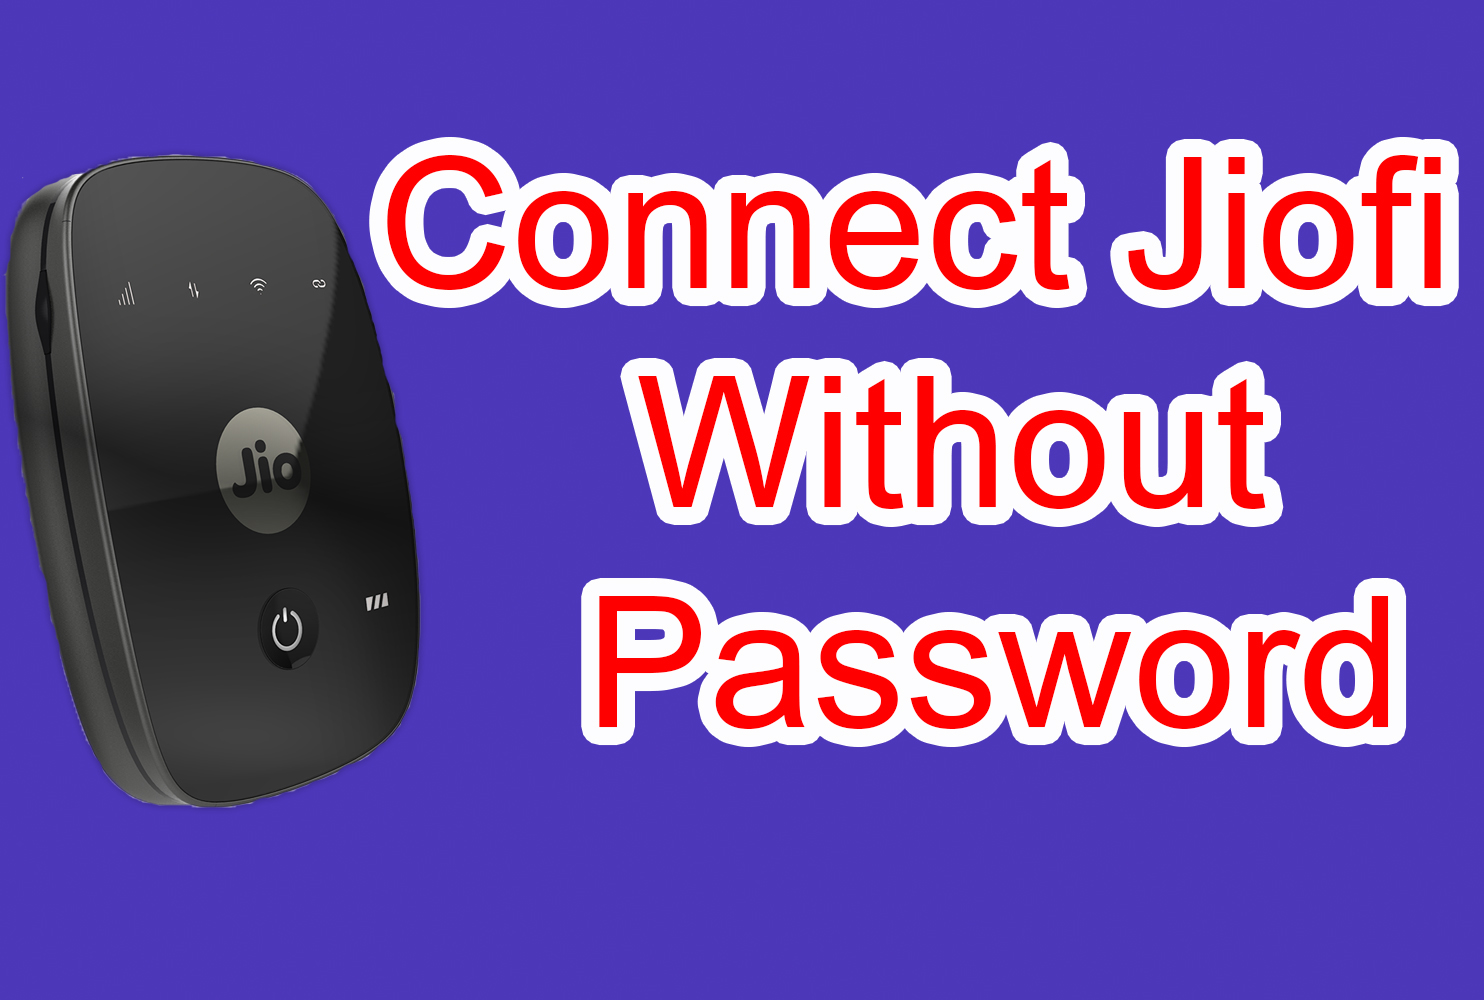 Connect Jiofi Without Entering Password